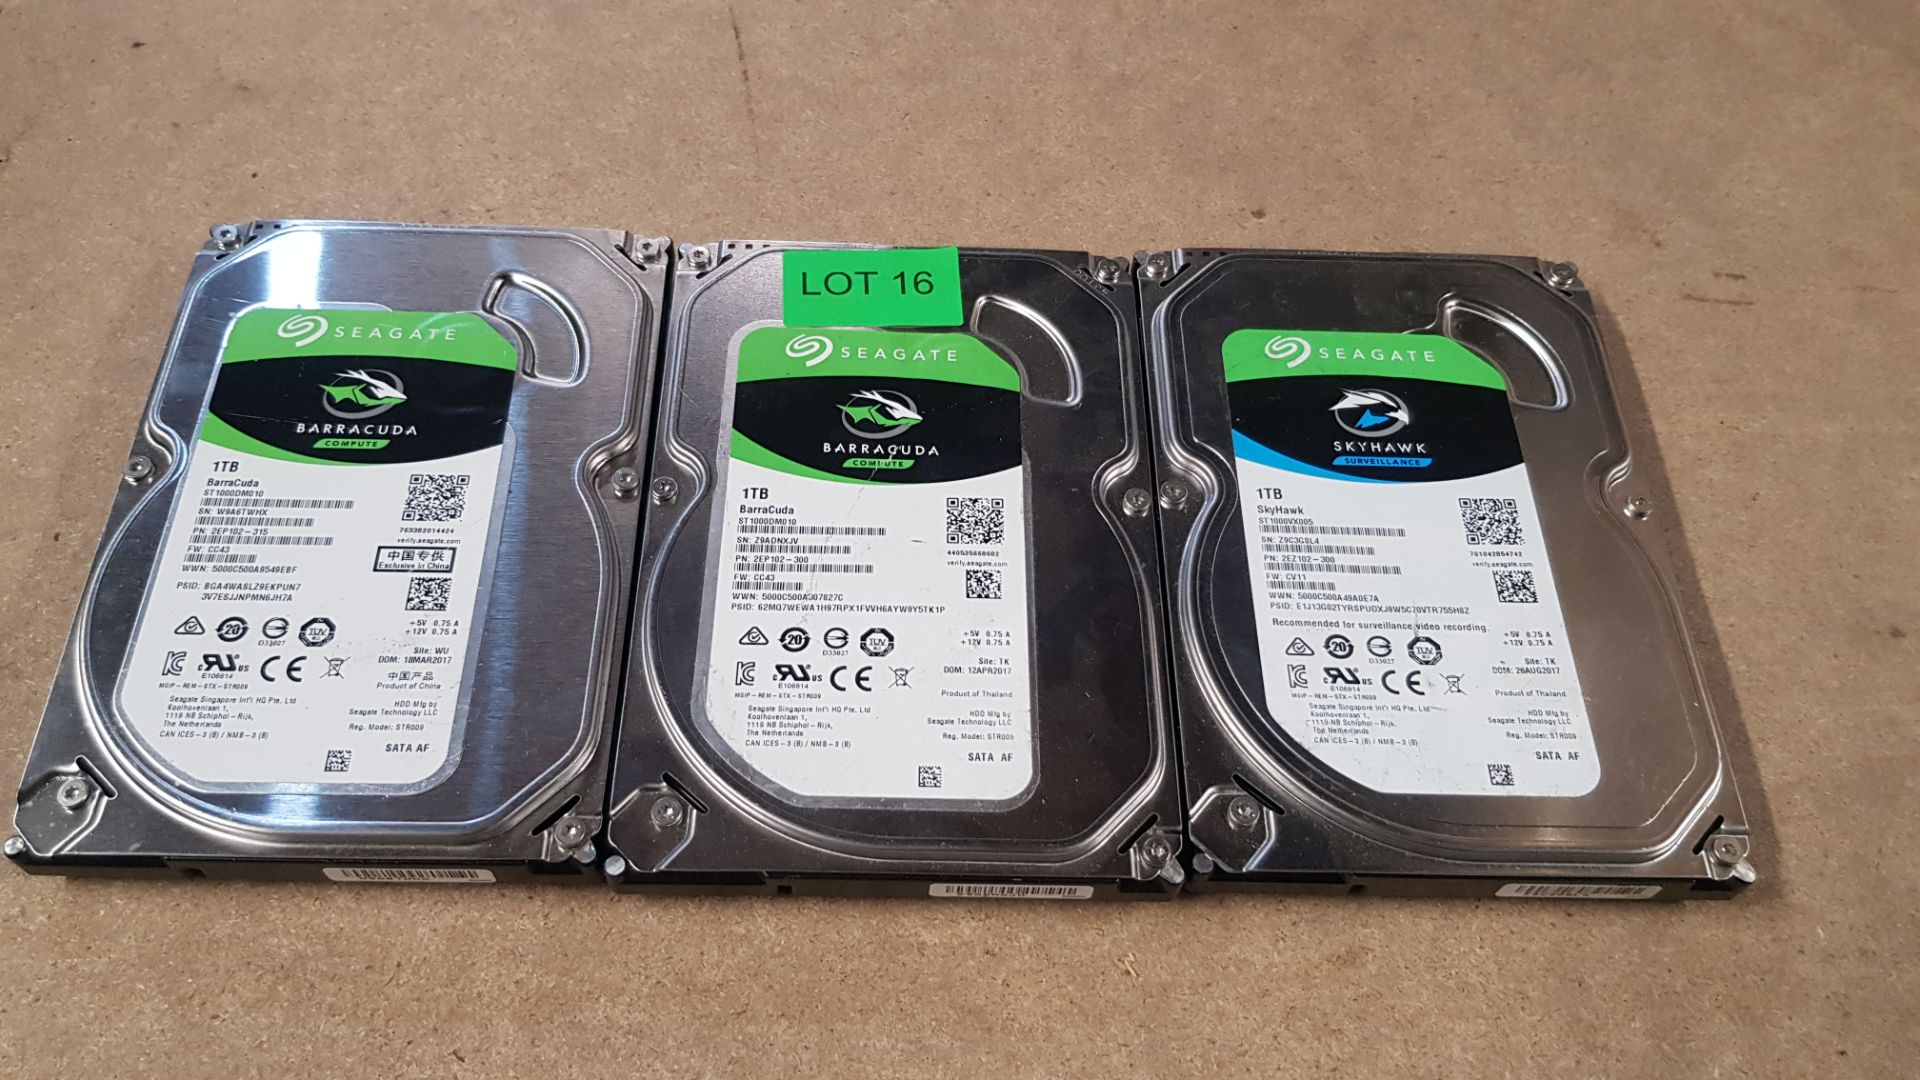 (13A) 3x WD Purple Surveillance Hard Drive 1TB 3.5 SATA 64MB Cache. (Contents Wiped On Units). - Image 2 of 3